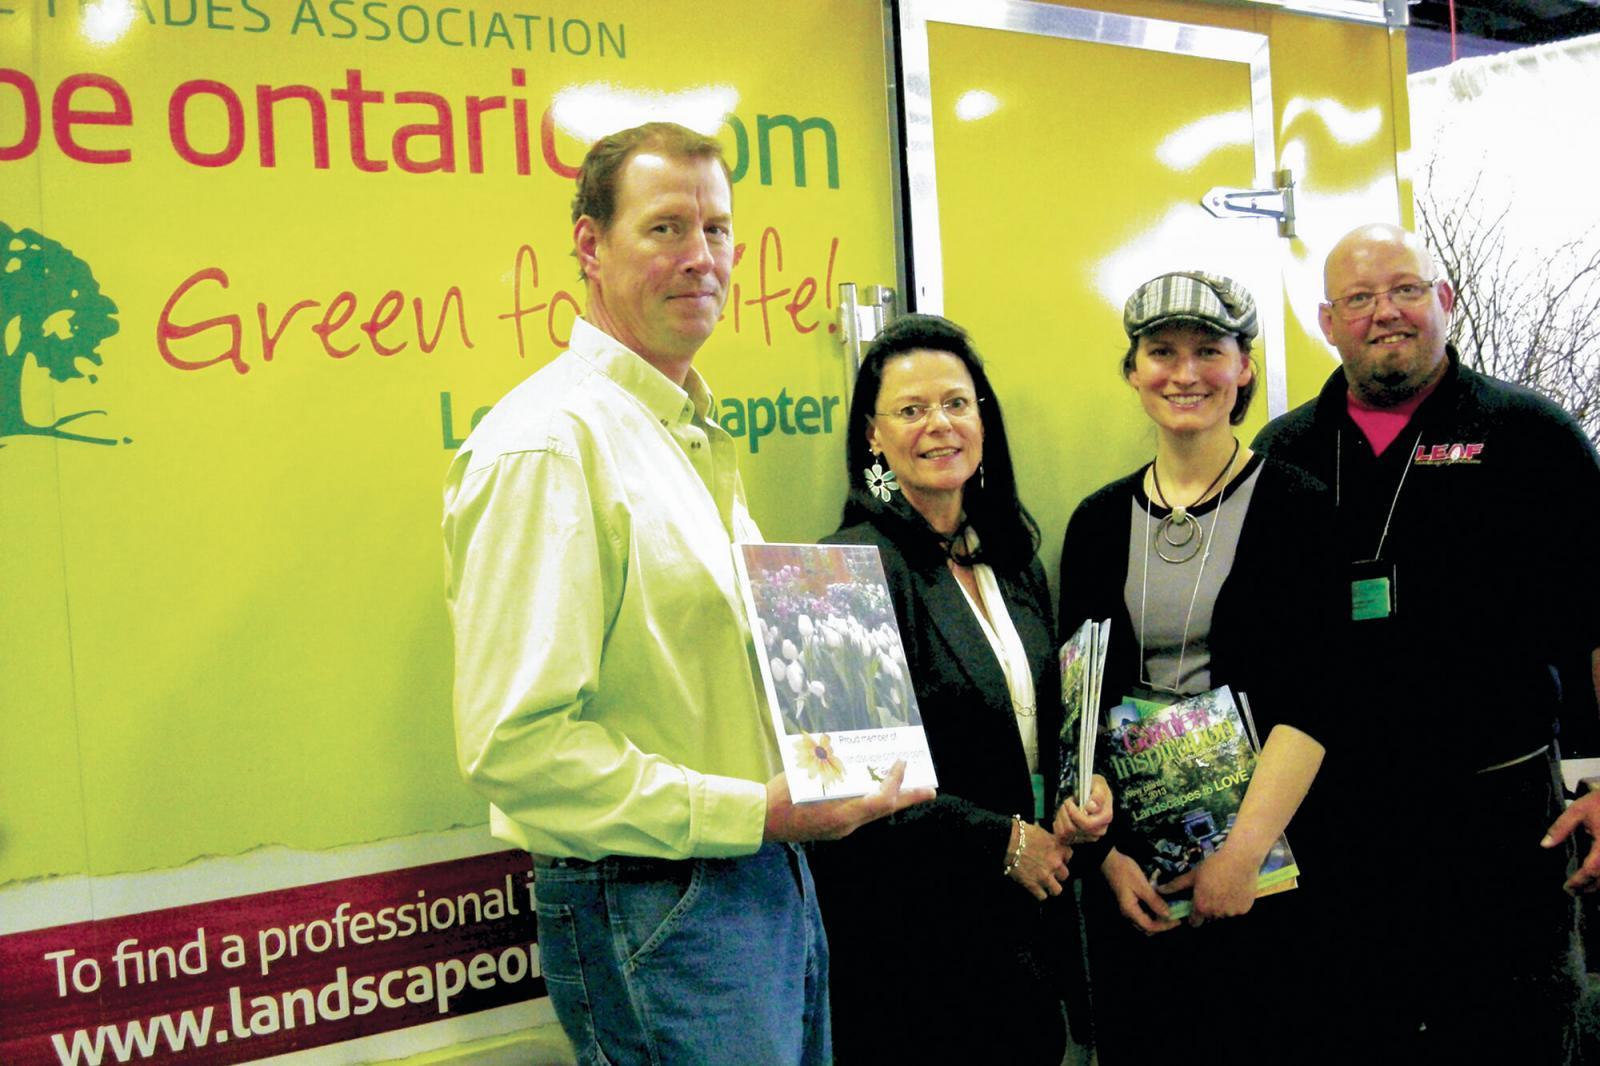 London Chapter well represented at home and garden shows